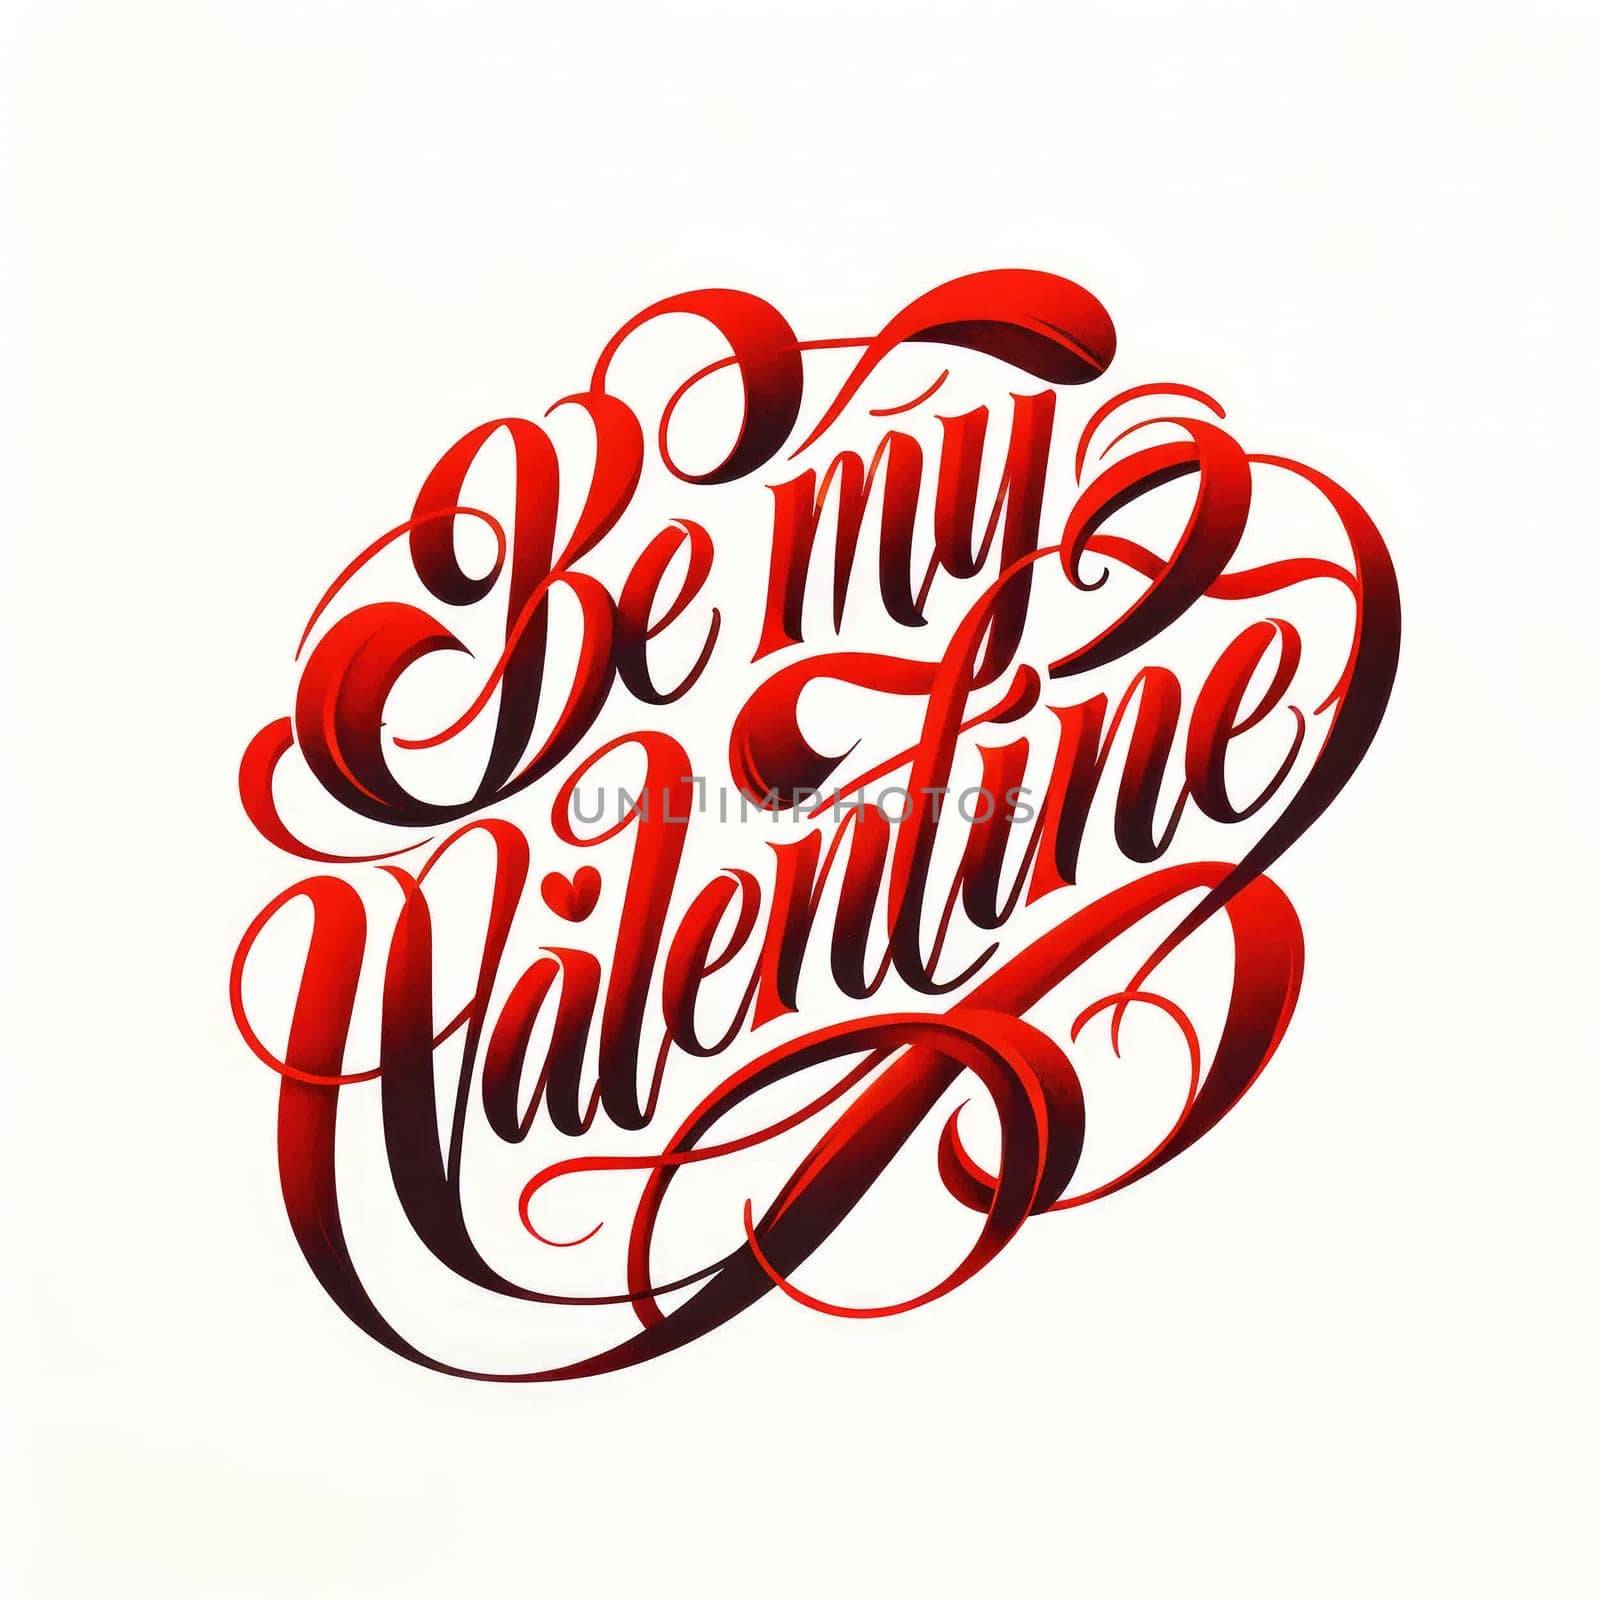 Valentines day quote in style of handwritten script by biancoblue